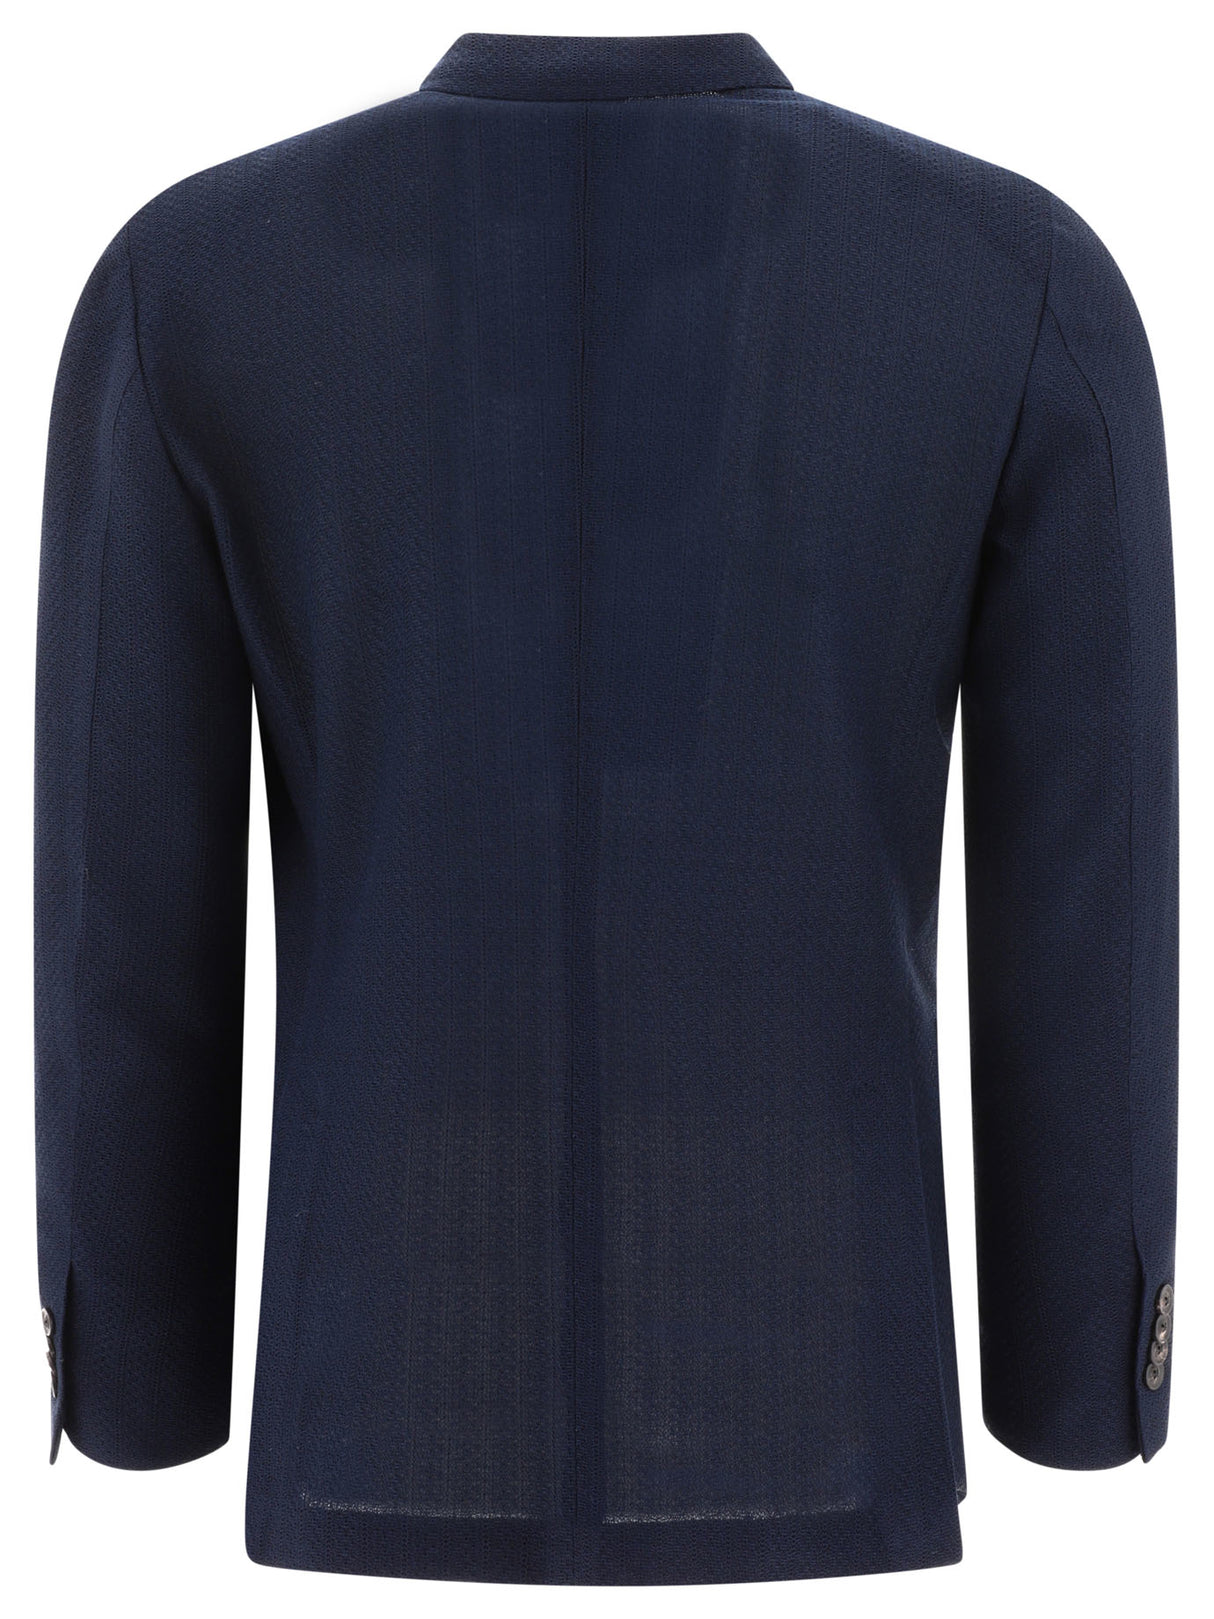 LARDINI Navy Double-Breasted Knit Blazer for Men - SS24 Collection